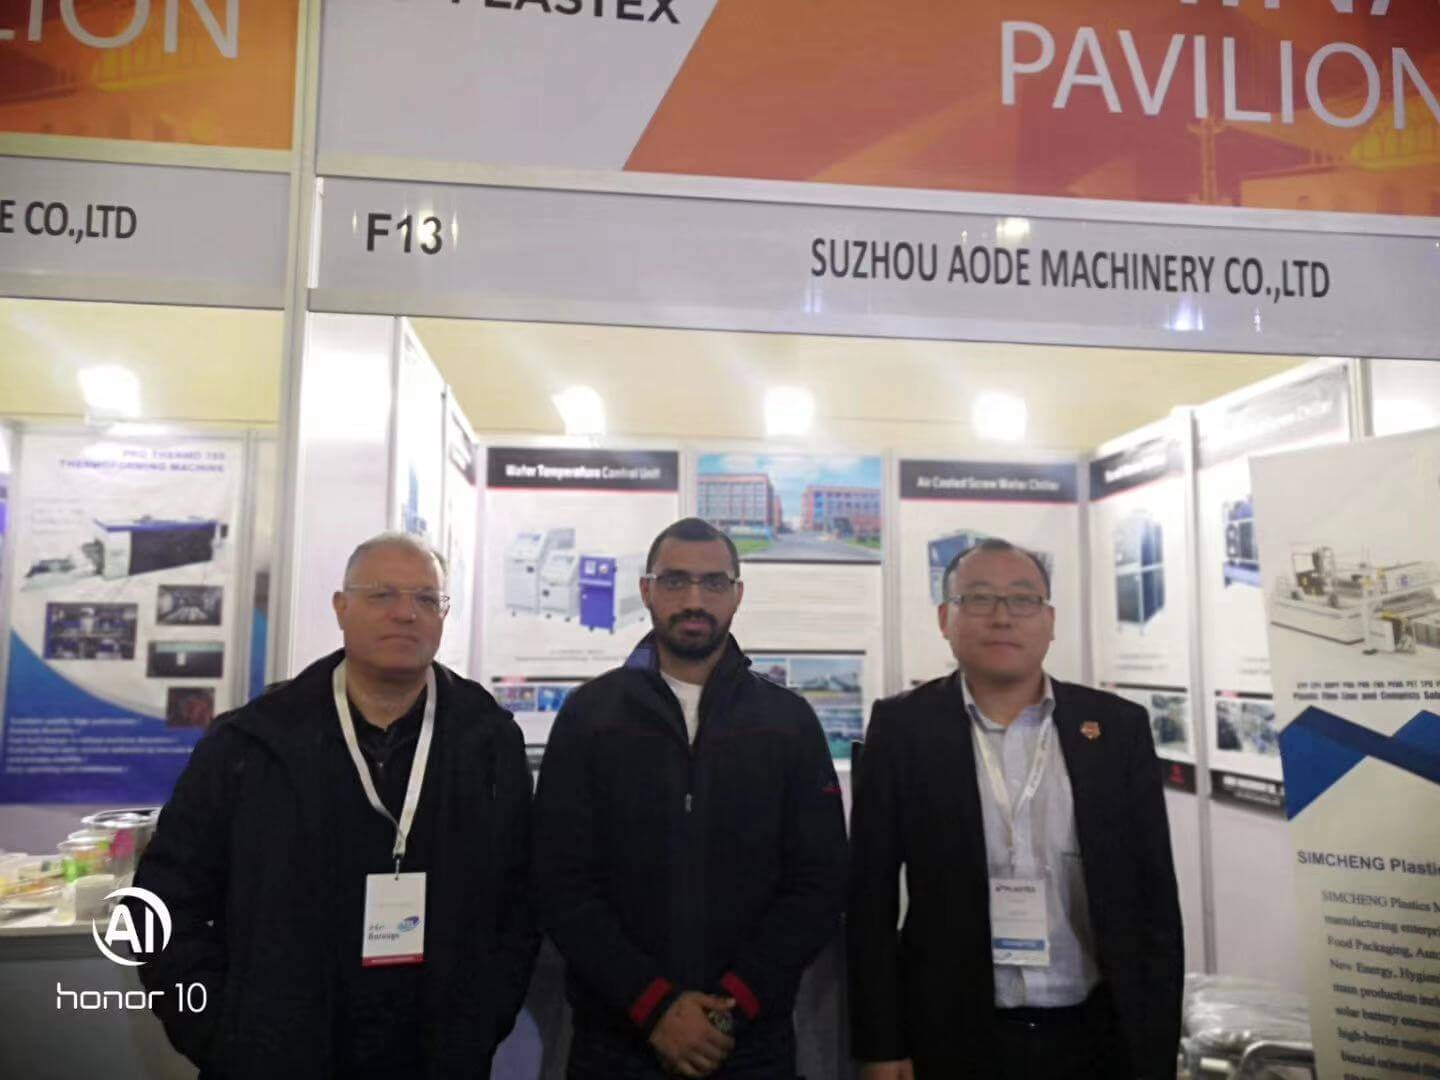 AODE at Egypt International Exhibition Center on 2020.01.09~2020.01.12